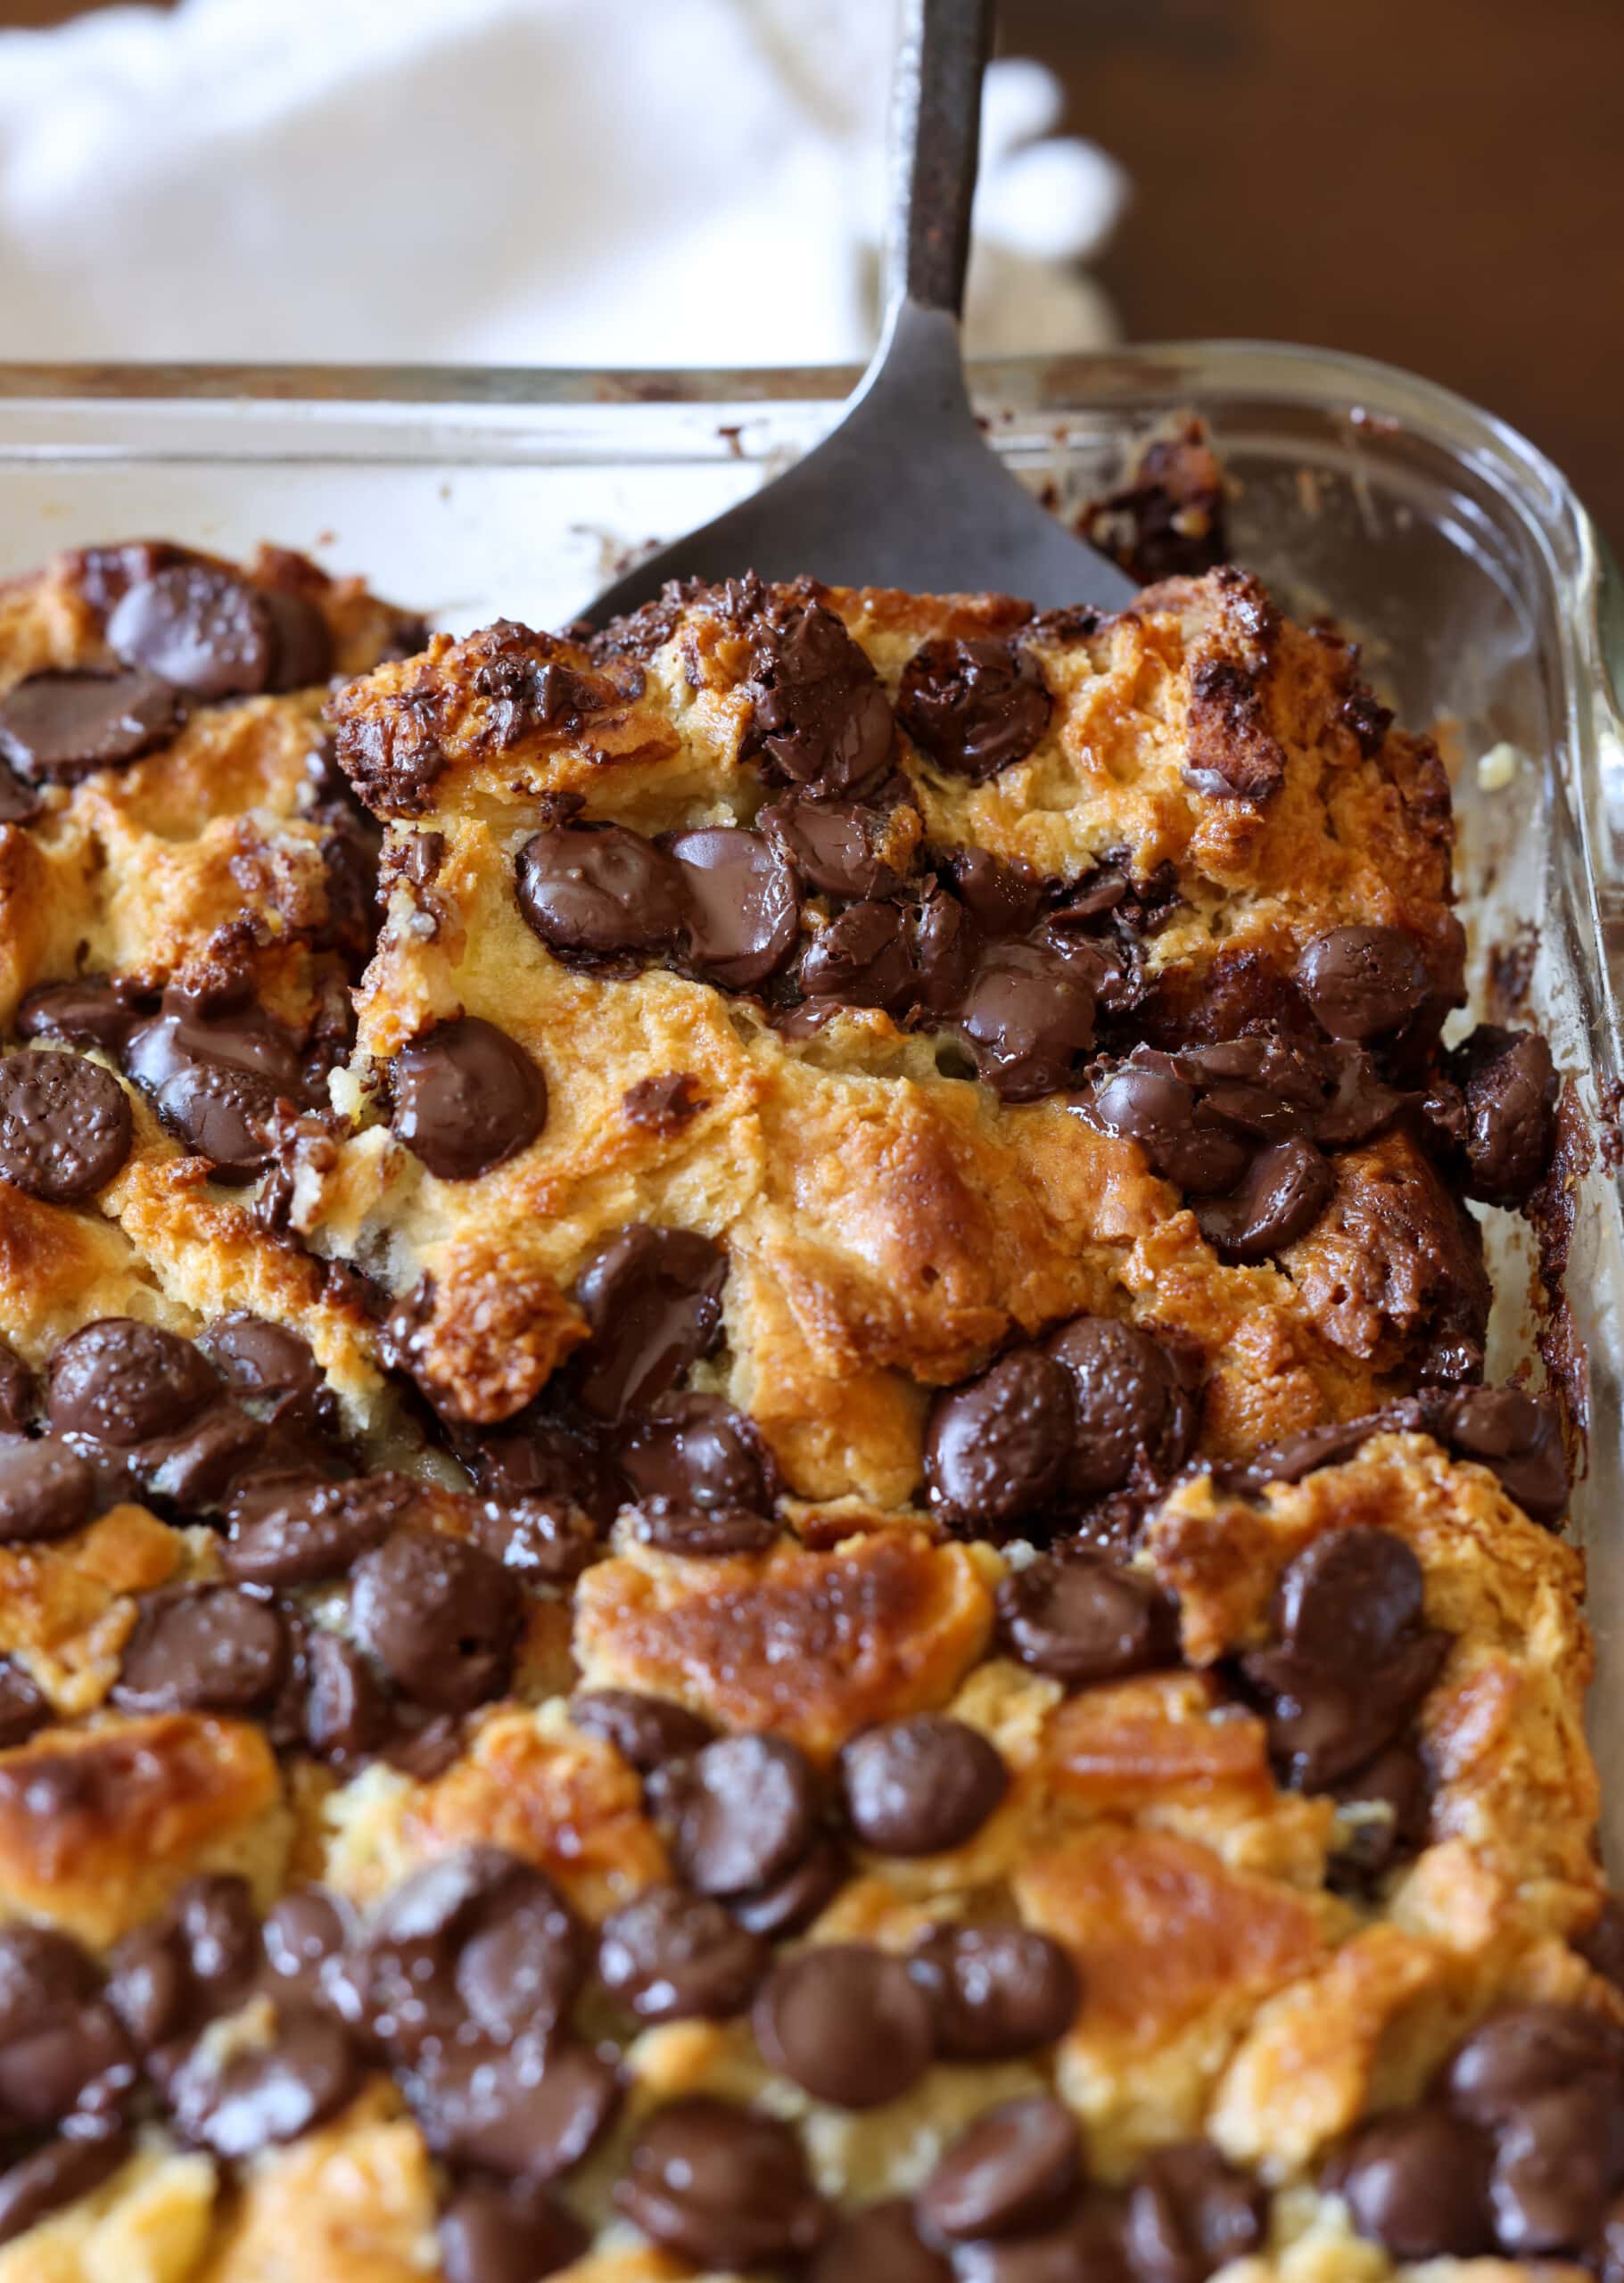 Scoop a biscuit bread pudding topped with chocolate chips